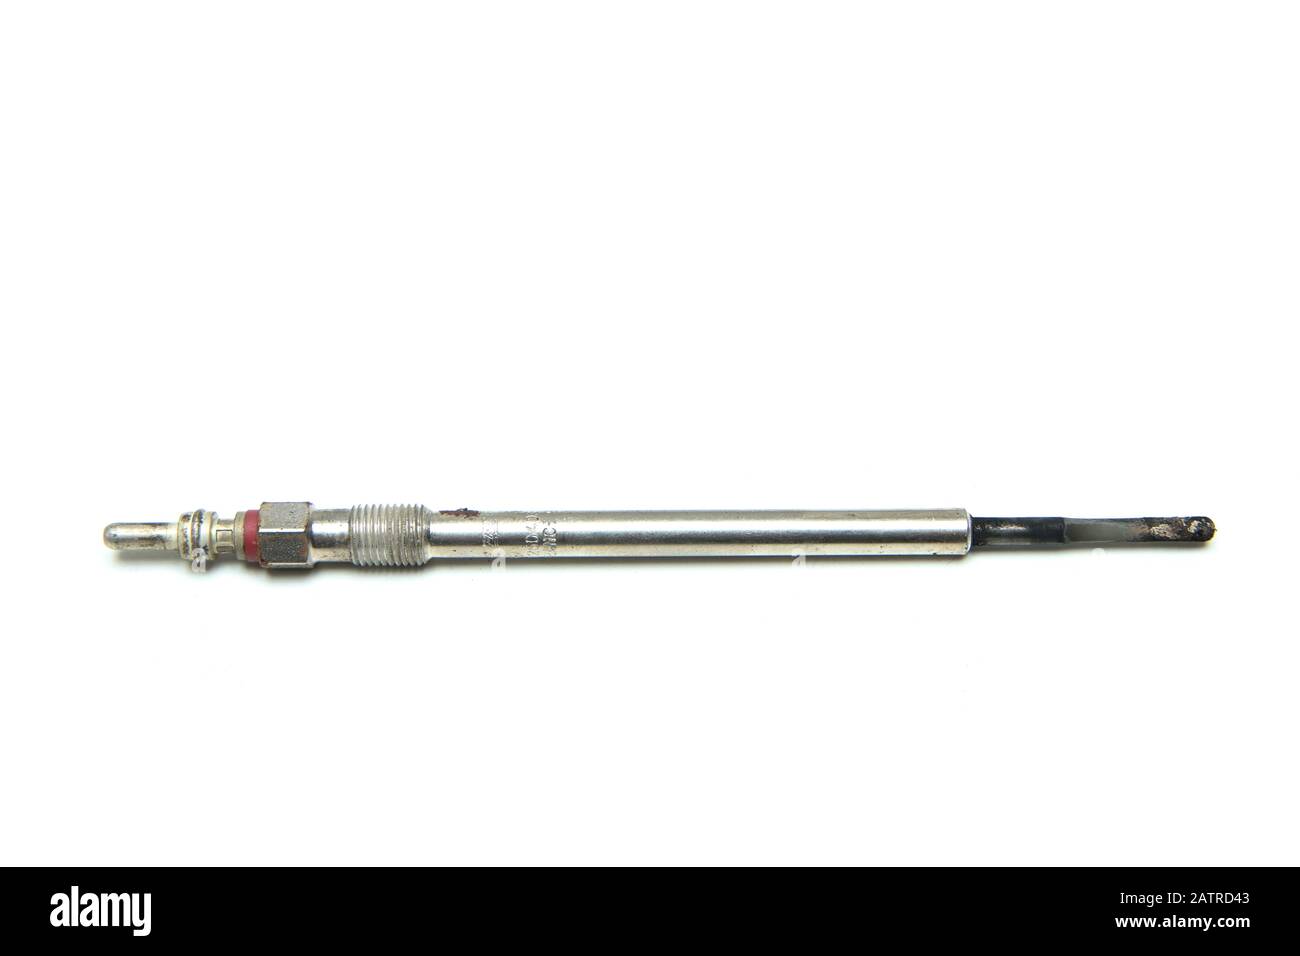 The used glow plug for diesel engines isolated on a white background. Stock Photo